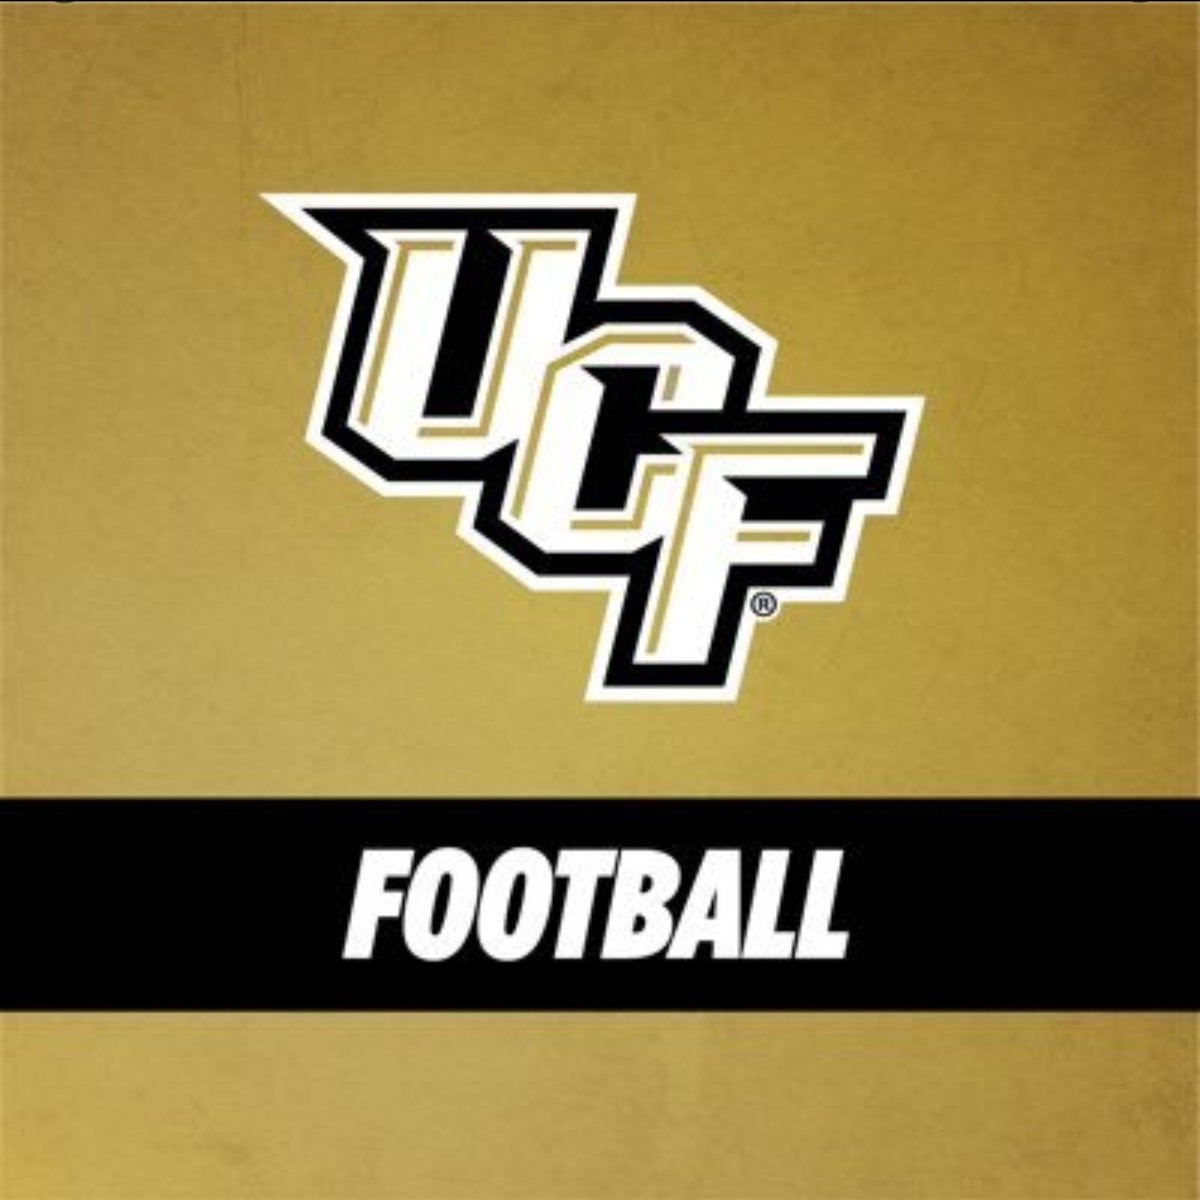 EXTREMELY BLESSED TO HAVE RECEIVED MY 1ST OFFER FROM THE UNIVERSITY OF CENTRAL FLORIDA‼️ LET'S GO‼️ @MozeeJ43 @TeamKamMartin @LSNorthFootball